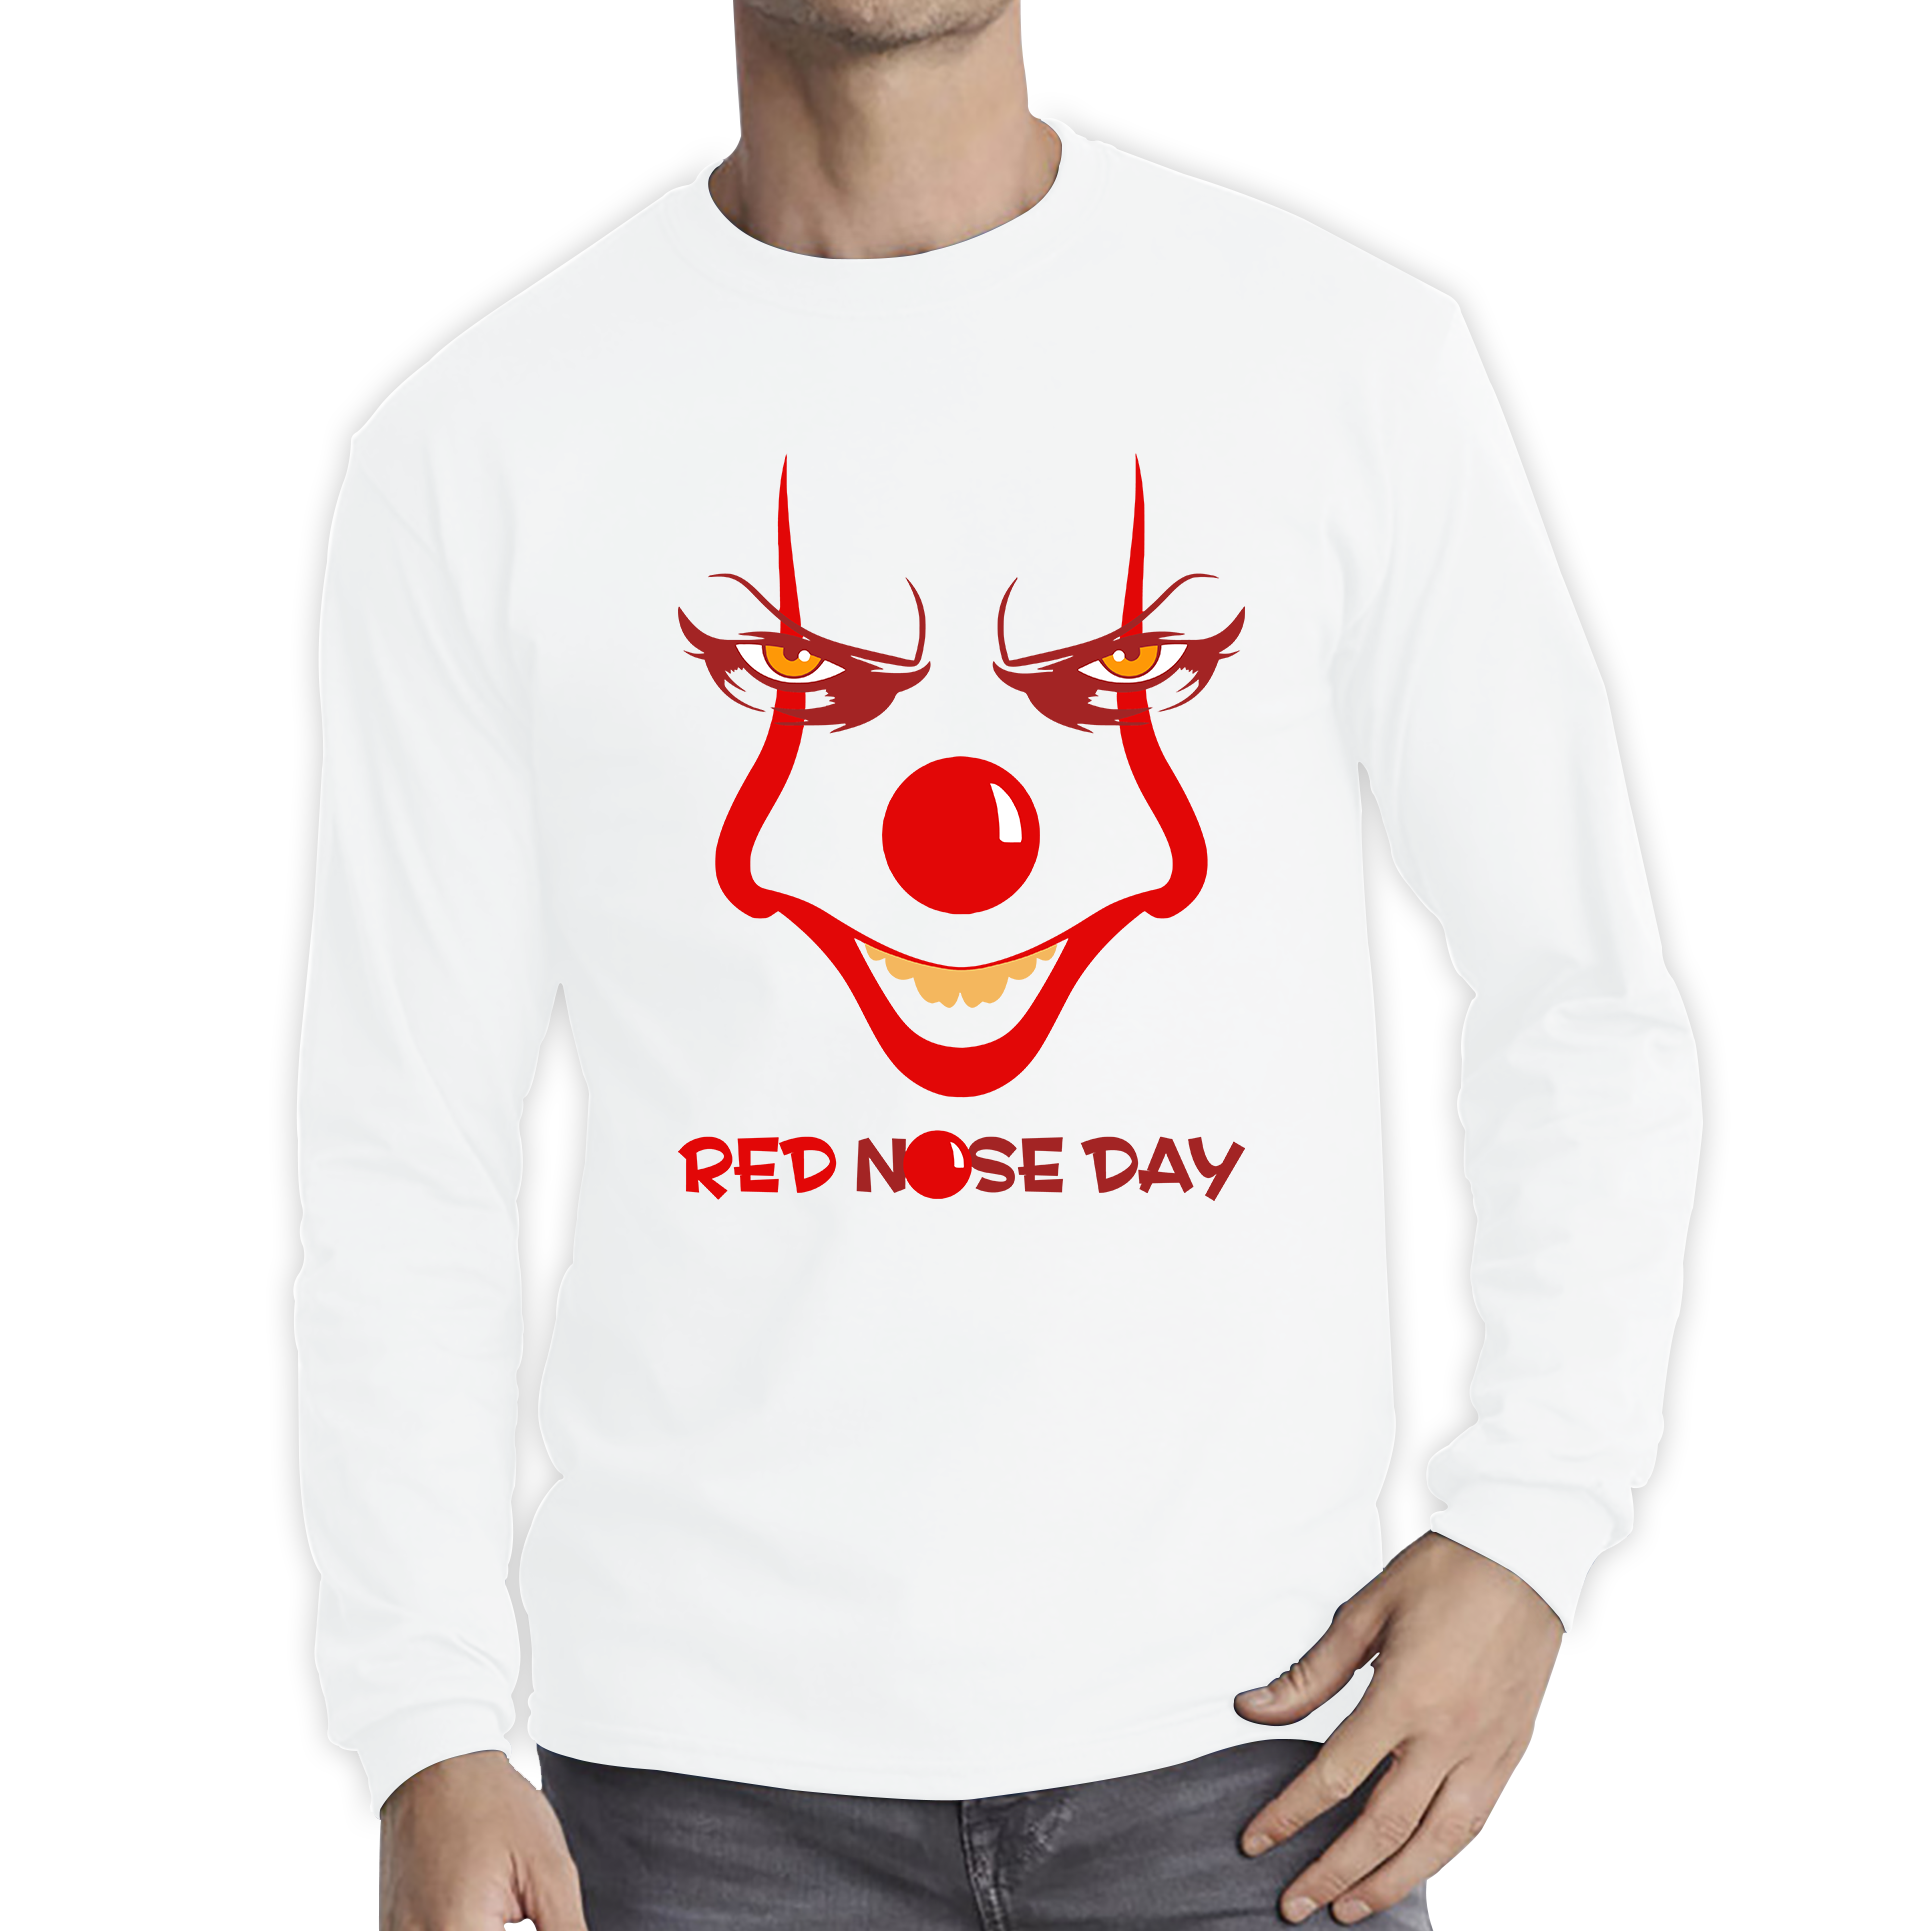 Pennywise Clown Face Red Nose Day Funny Comic Relief Adult Long Sleeve T Shirt. 50% Goes To Charity